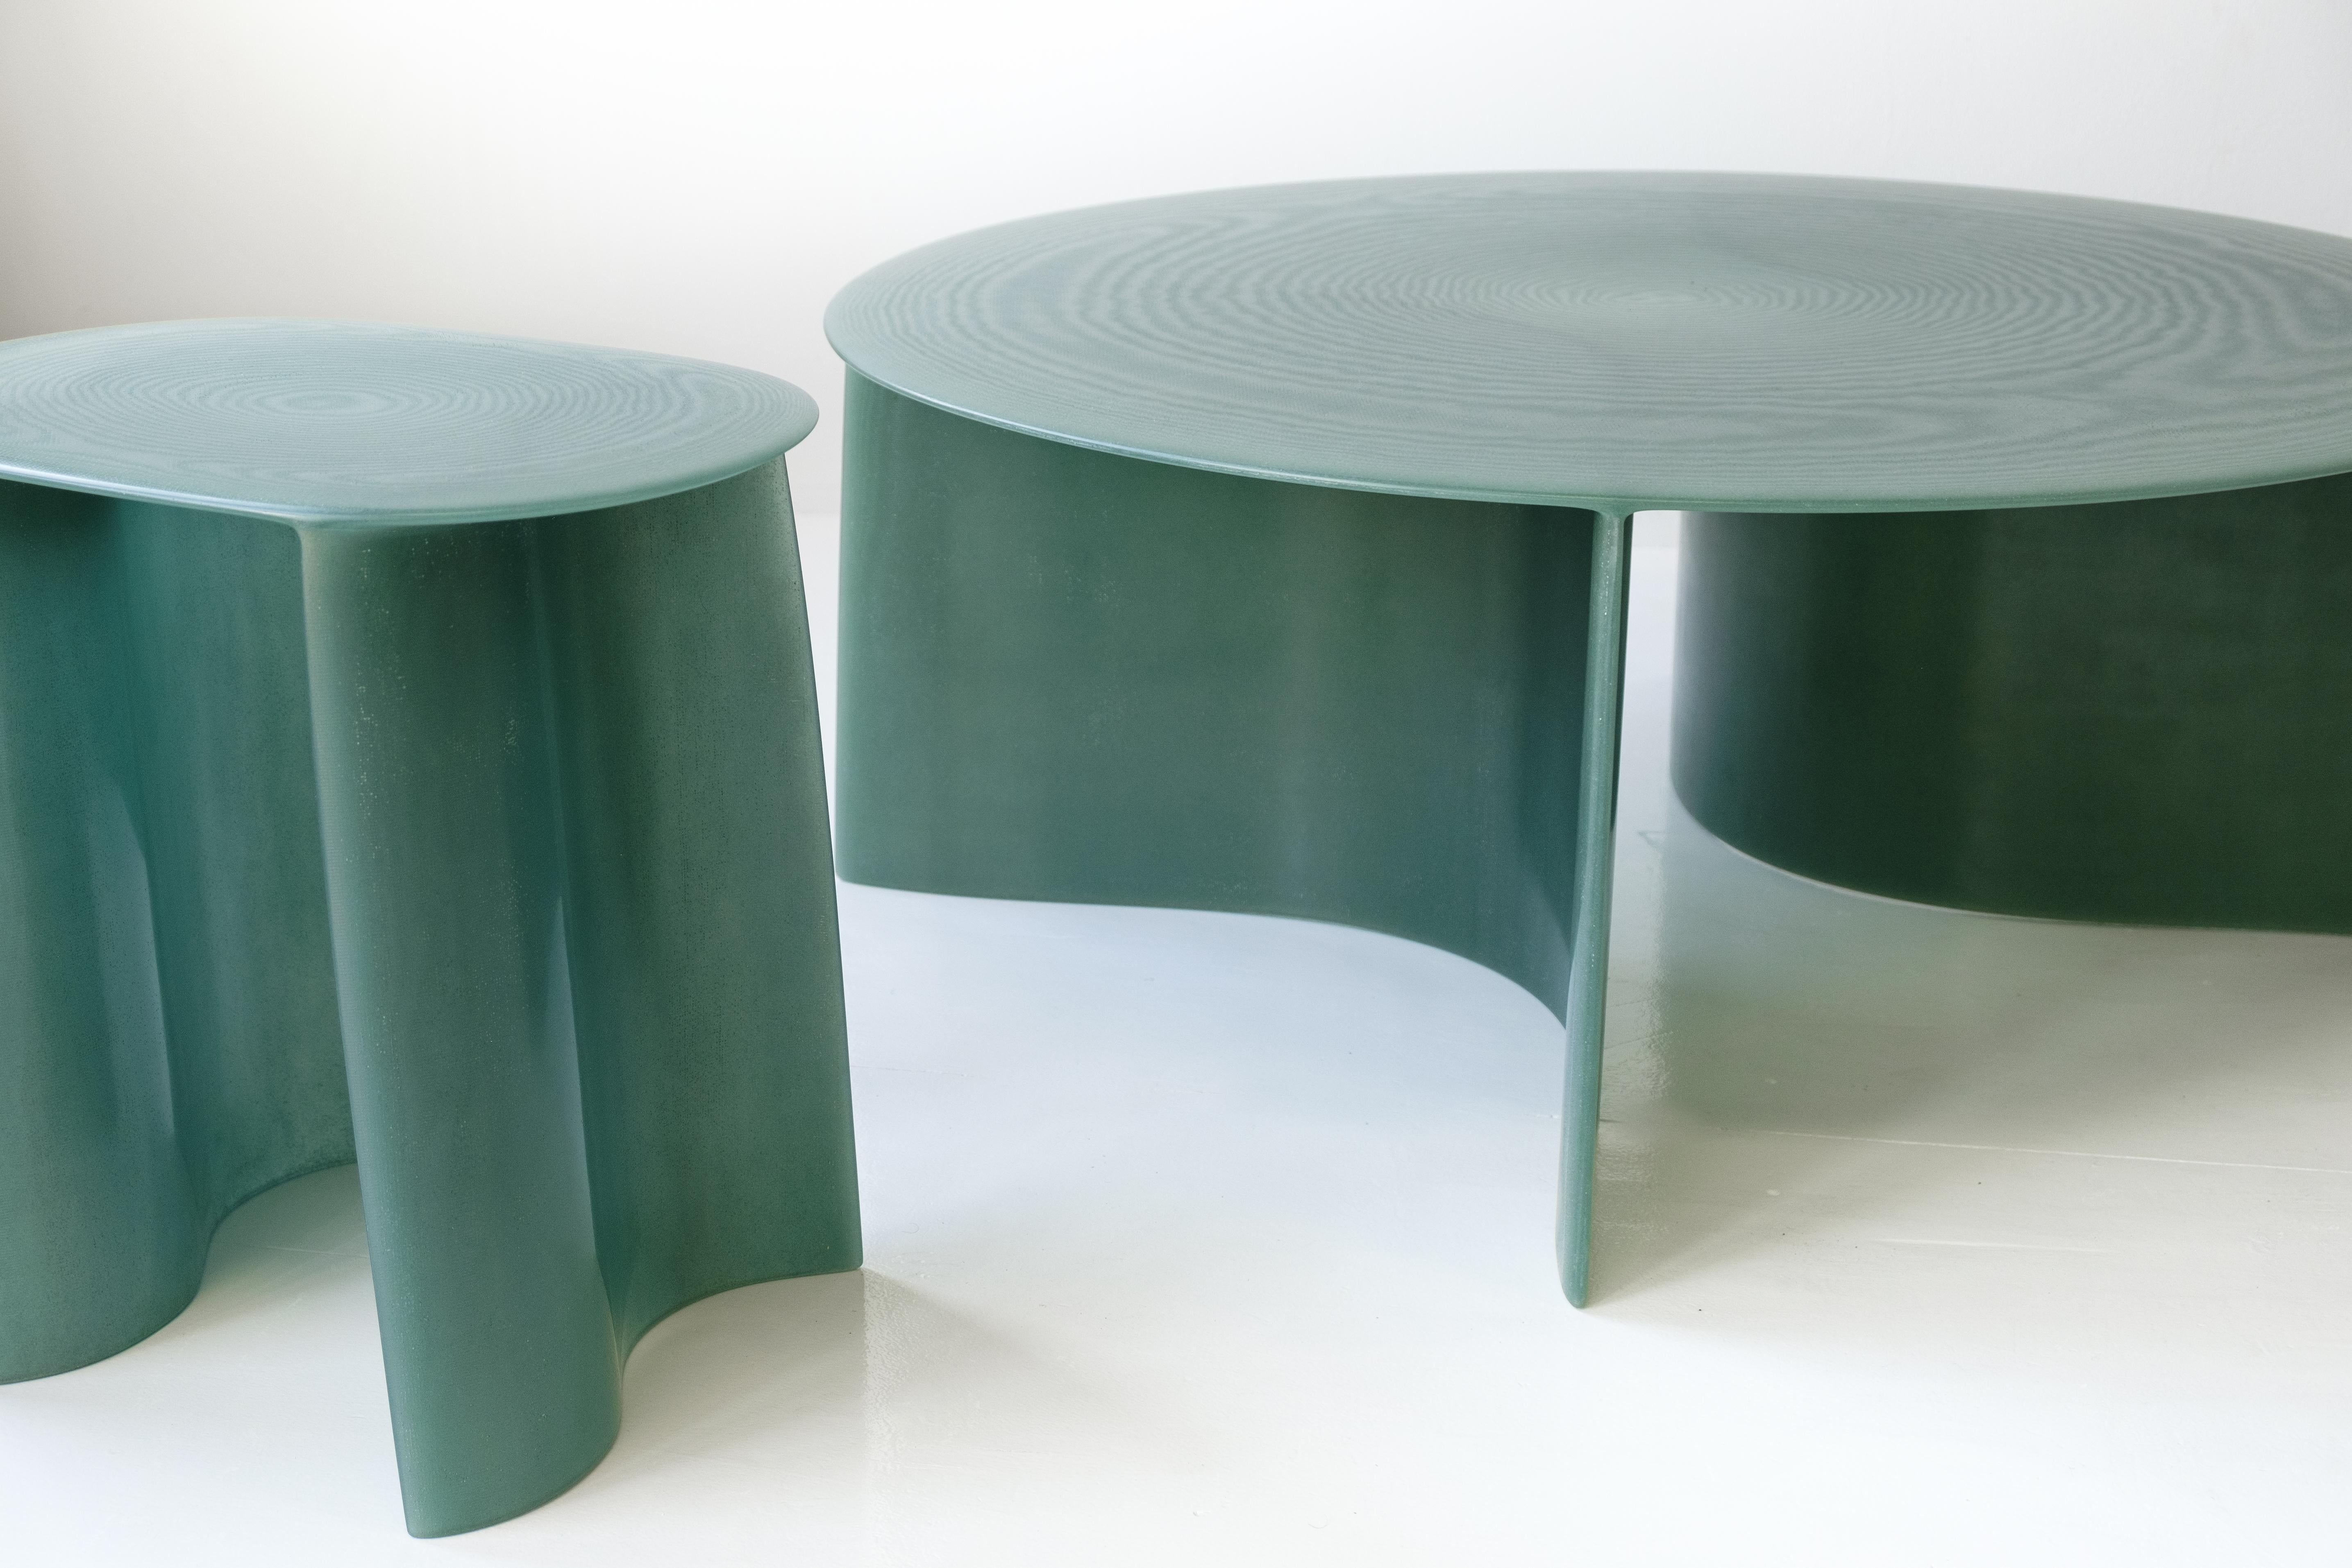 Dutch Contemporary Green Fiberglass, New Wave Coffee Table Round 100cm, by Lukas Cober For Sale